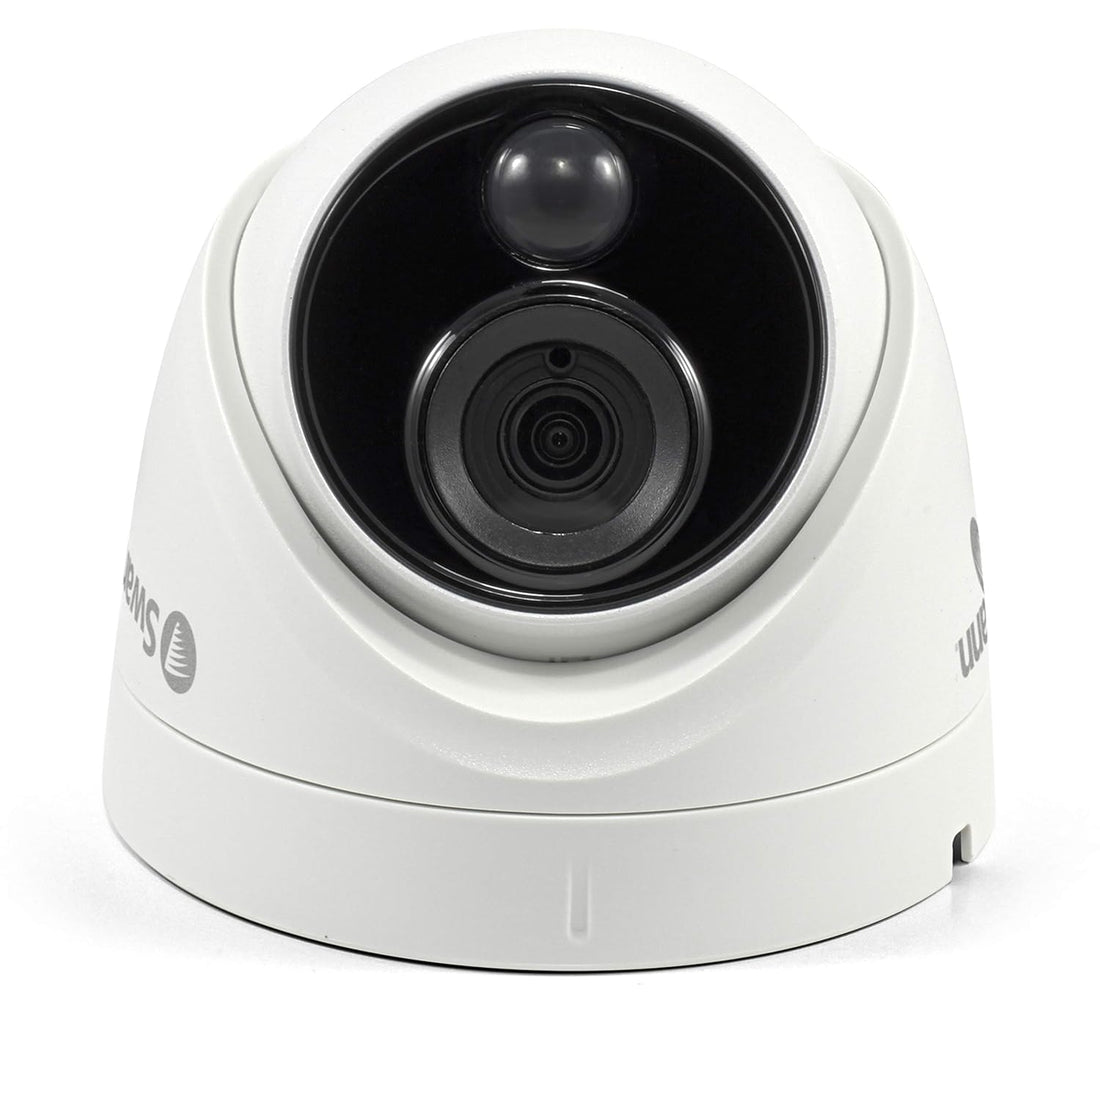 Swann 4K True Detect Add on Dome Security Camera, White (SWPRO-4KMSD)